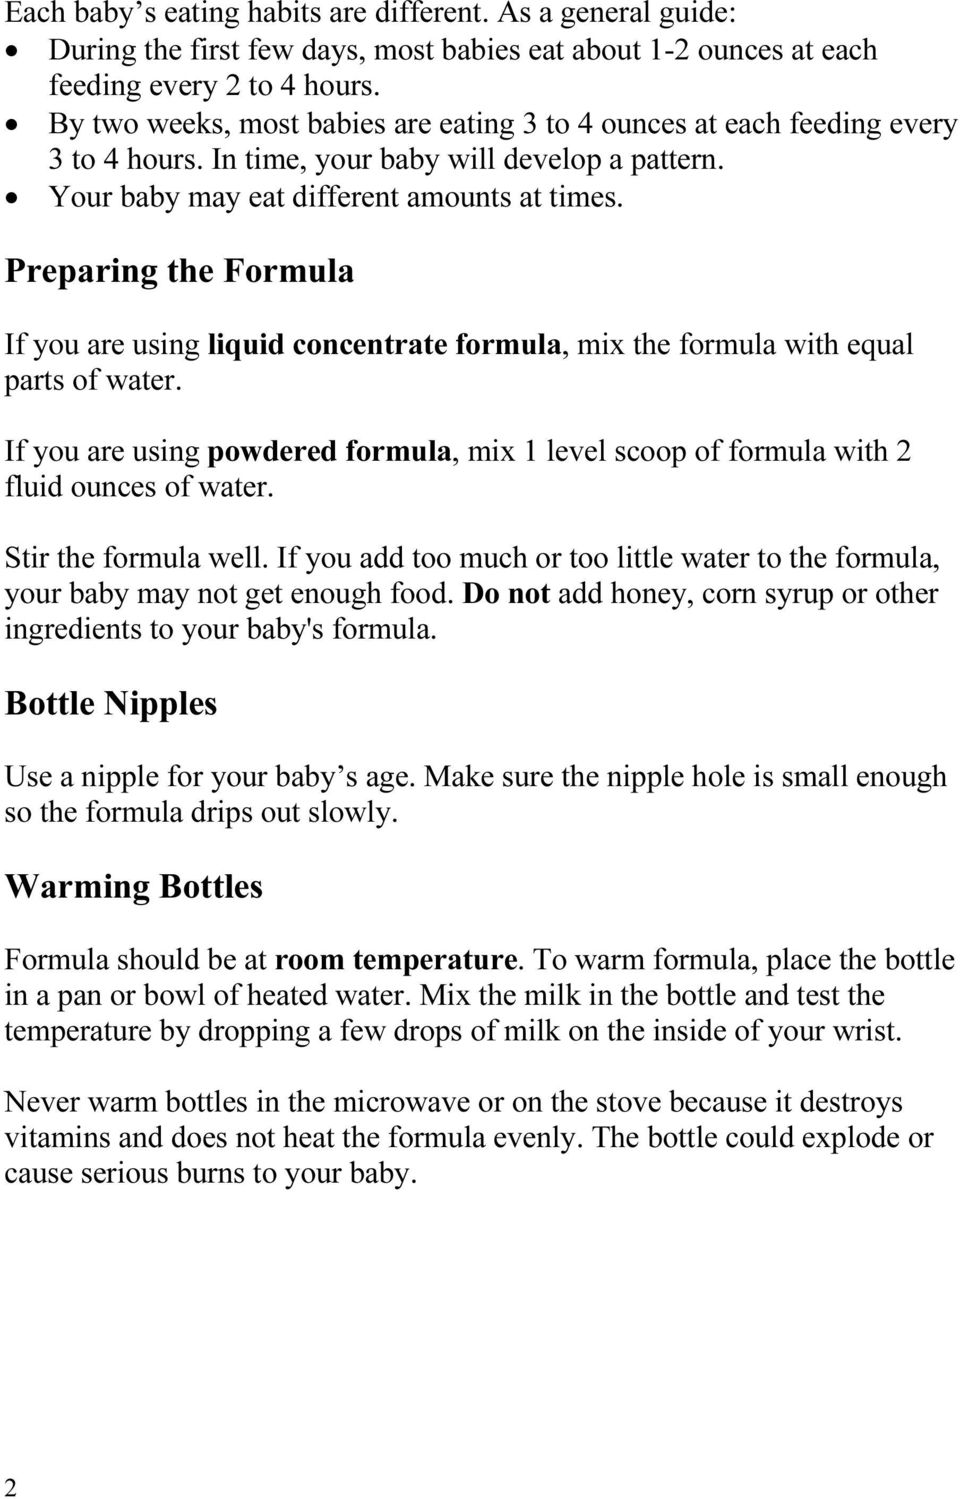 Preparing the Formula If you are using liquid concentrate formula, mix the formula with equal parts of water.